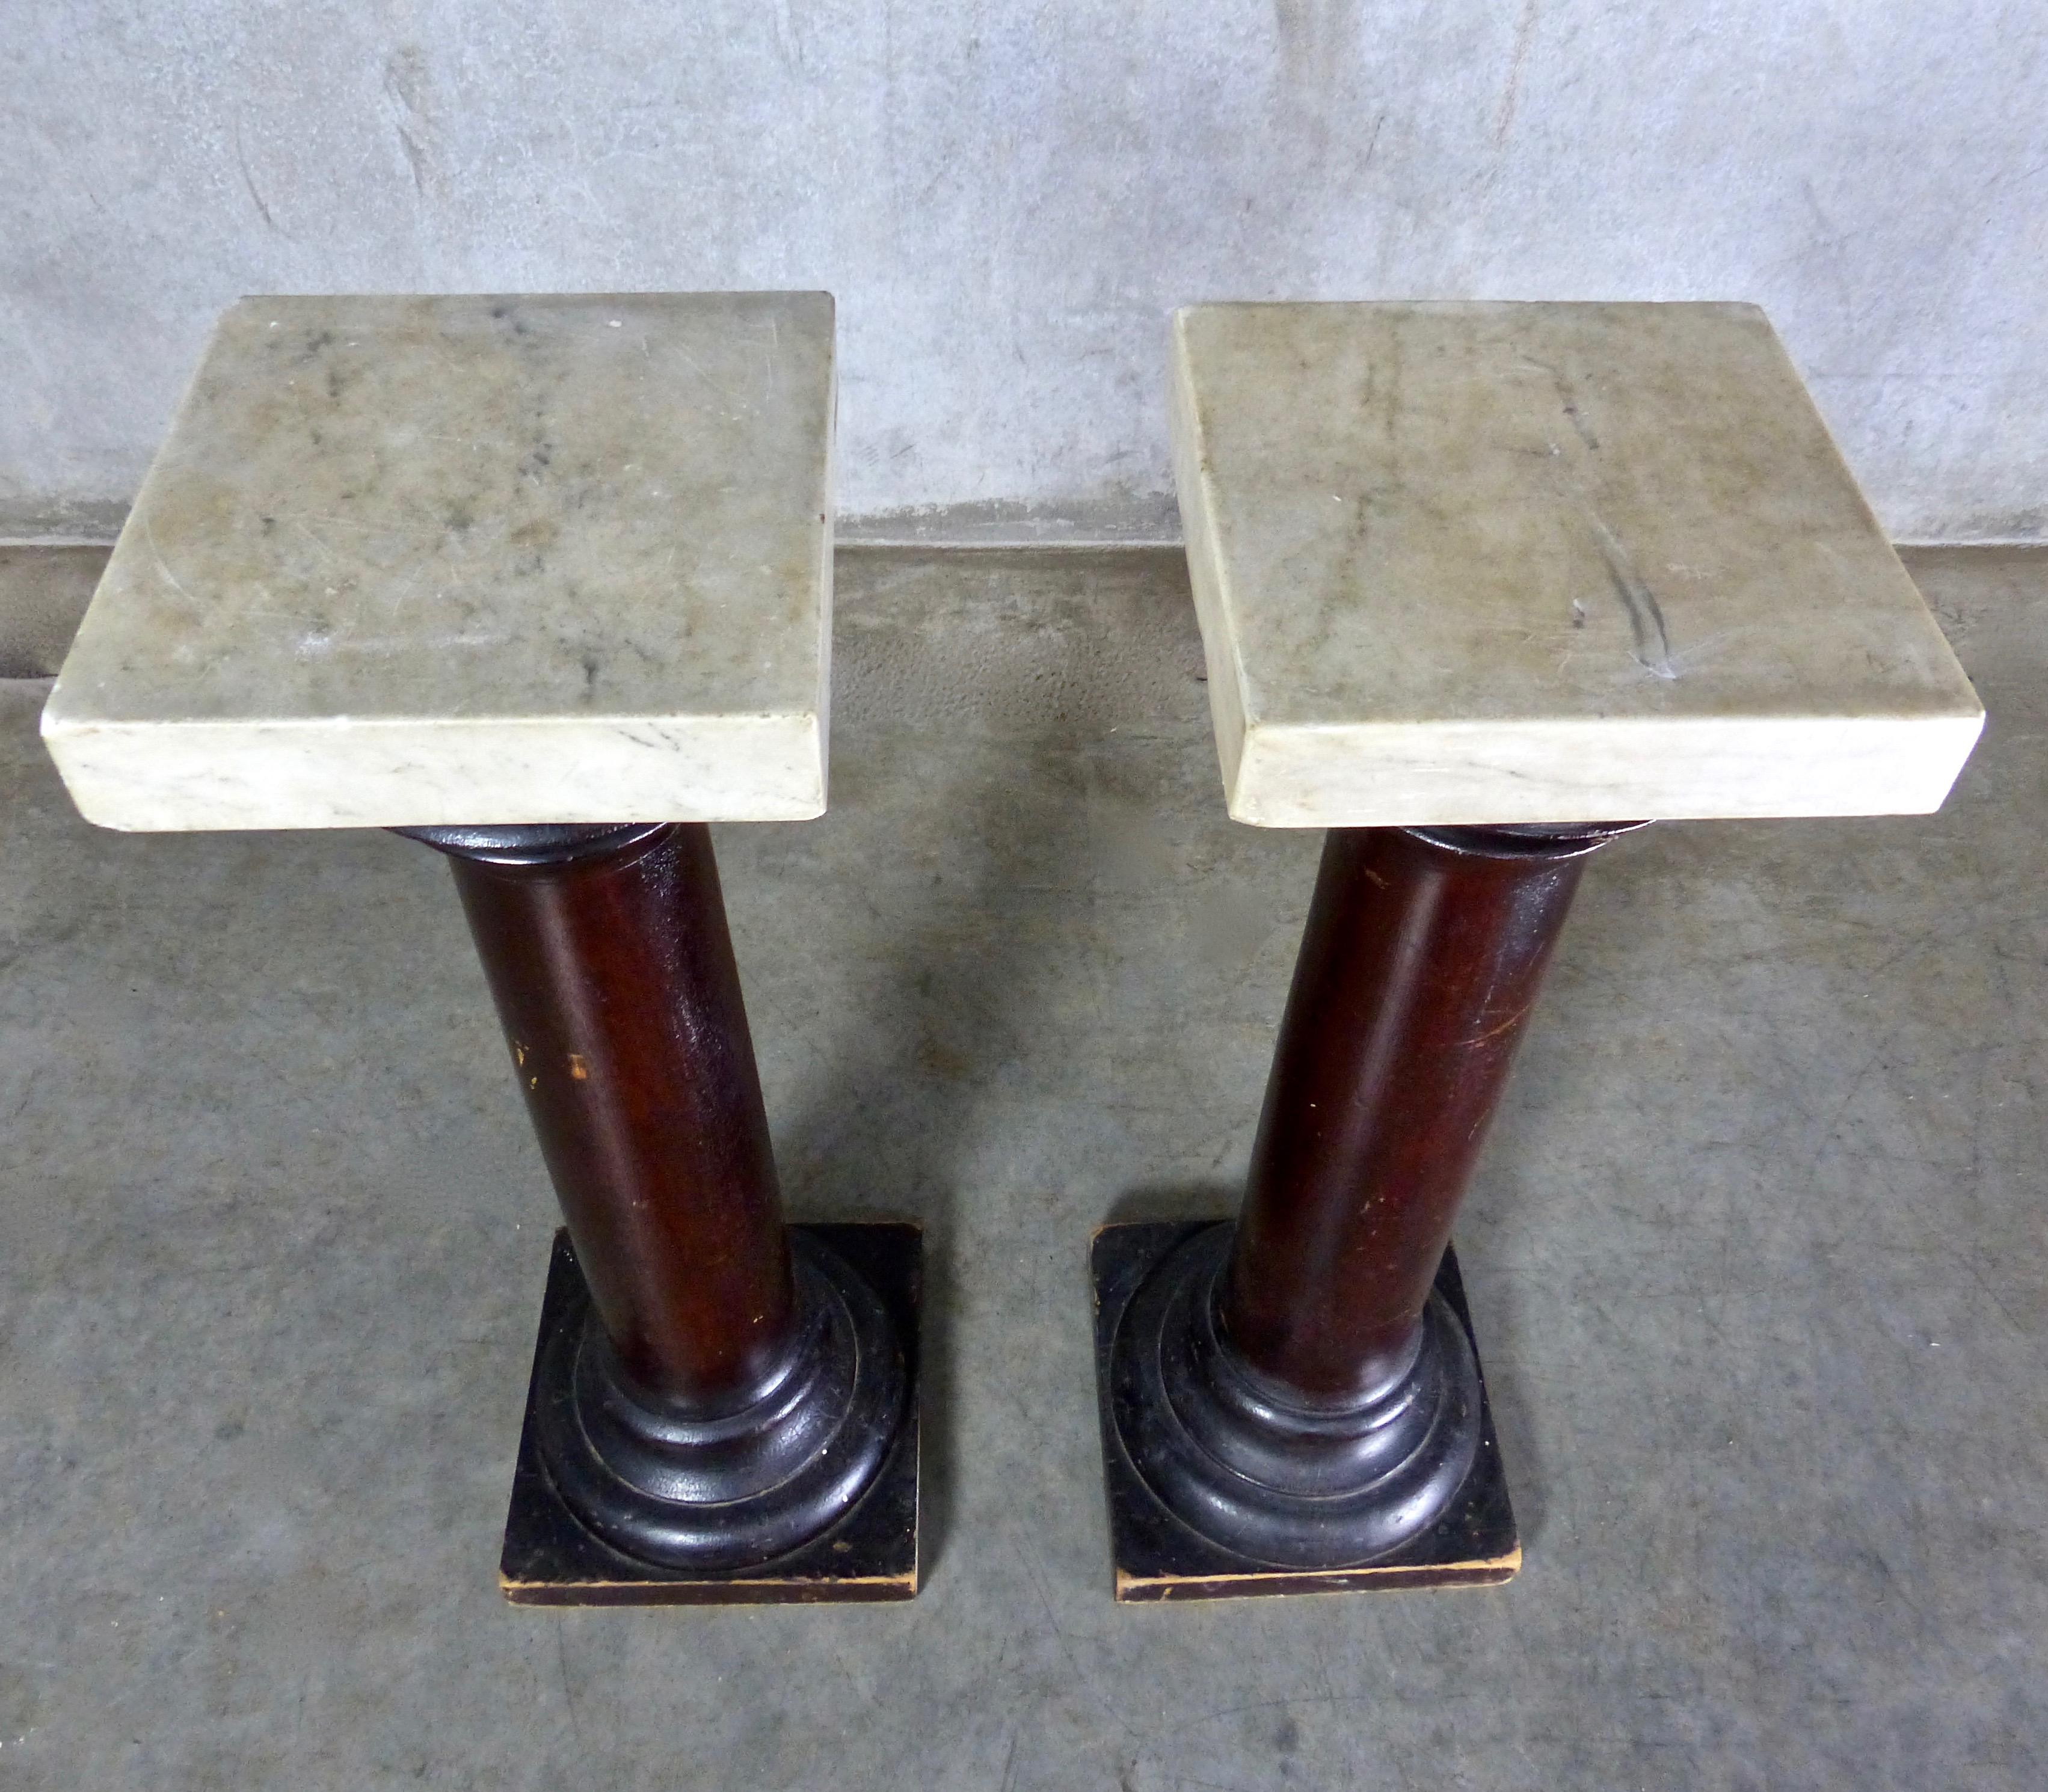 Matched pair of clean-lined mahogany columns/stands with built-in bases. And retaining original painted surfaces, circa 1900. Detachable tops made of thick slabs of squared marble. Use the pedestals as accent columns or display stands.
Dimensions: